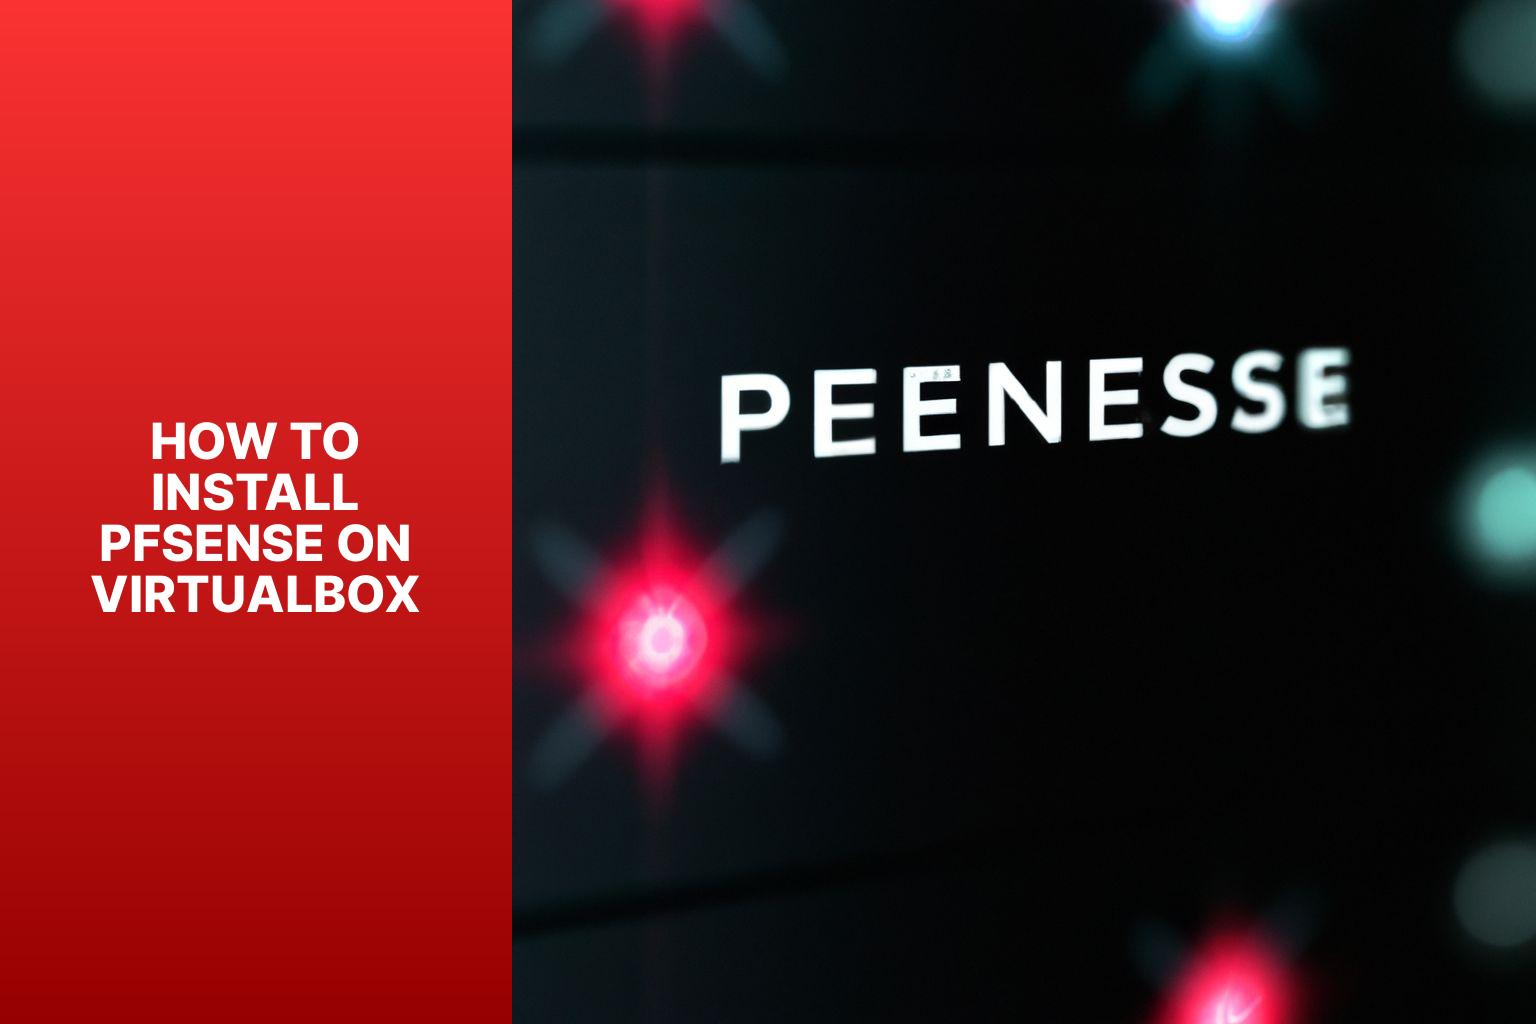 Reset Your Raspberry Pi how to install pfsense on